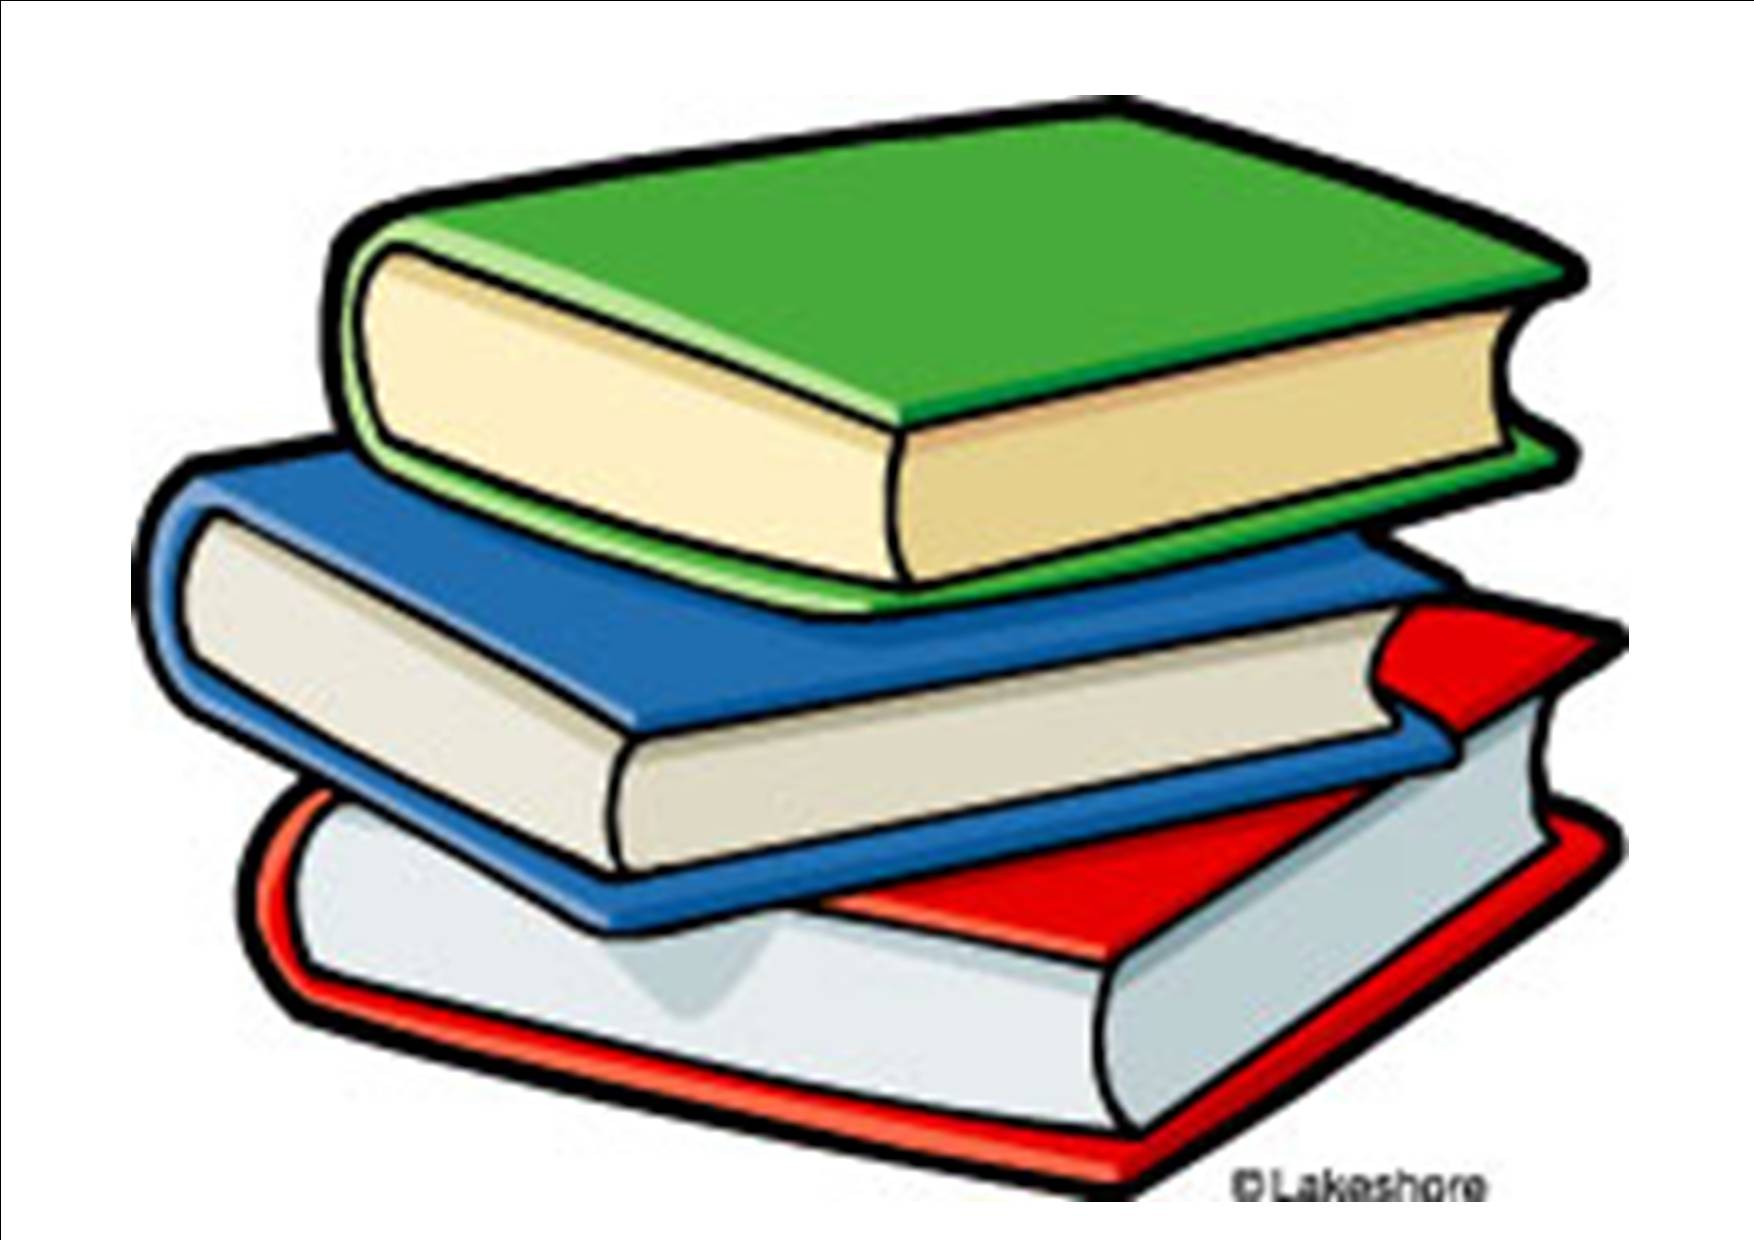 Education school supplies clipart free free clipart images